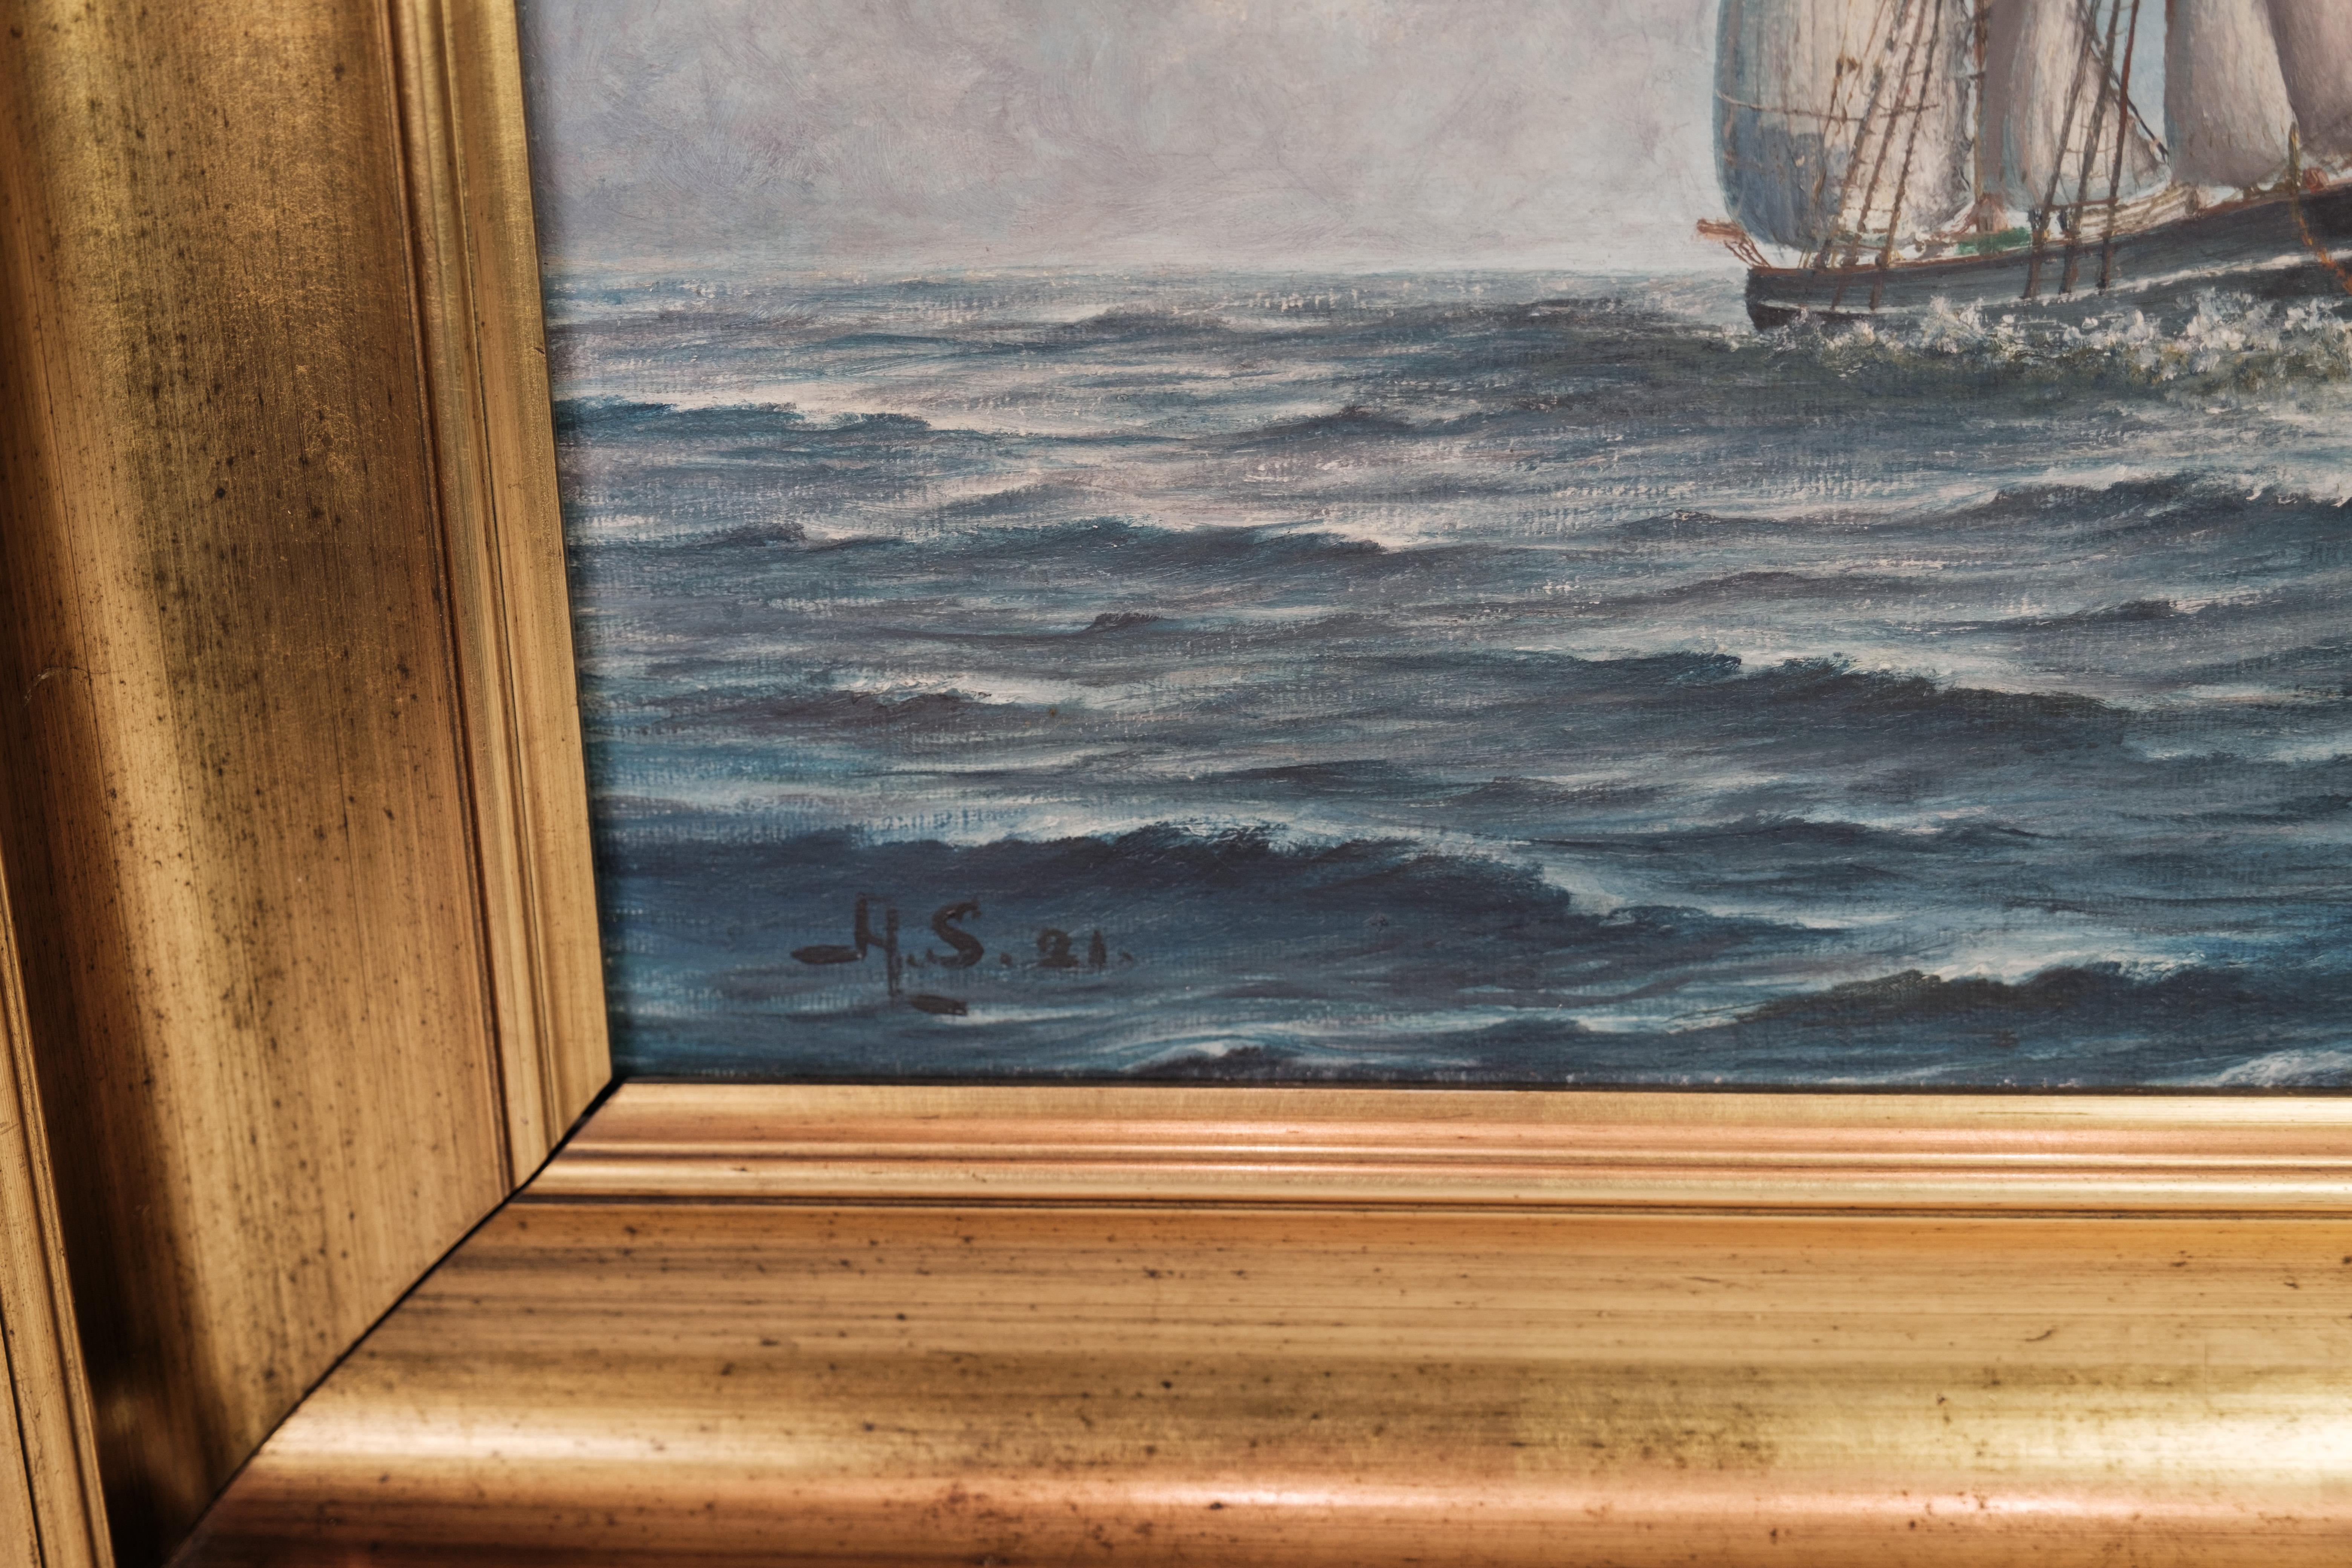 Other Marine Painting of Sea, Ship and Clouds with Gold Frame Signed H.S 21 '1921'